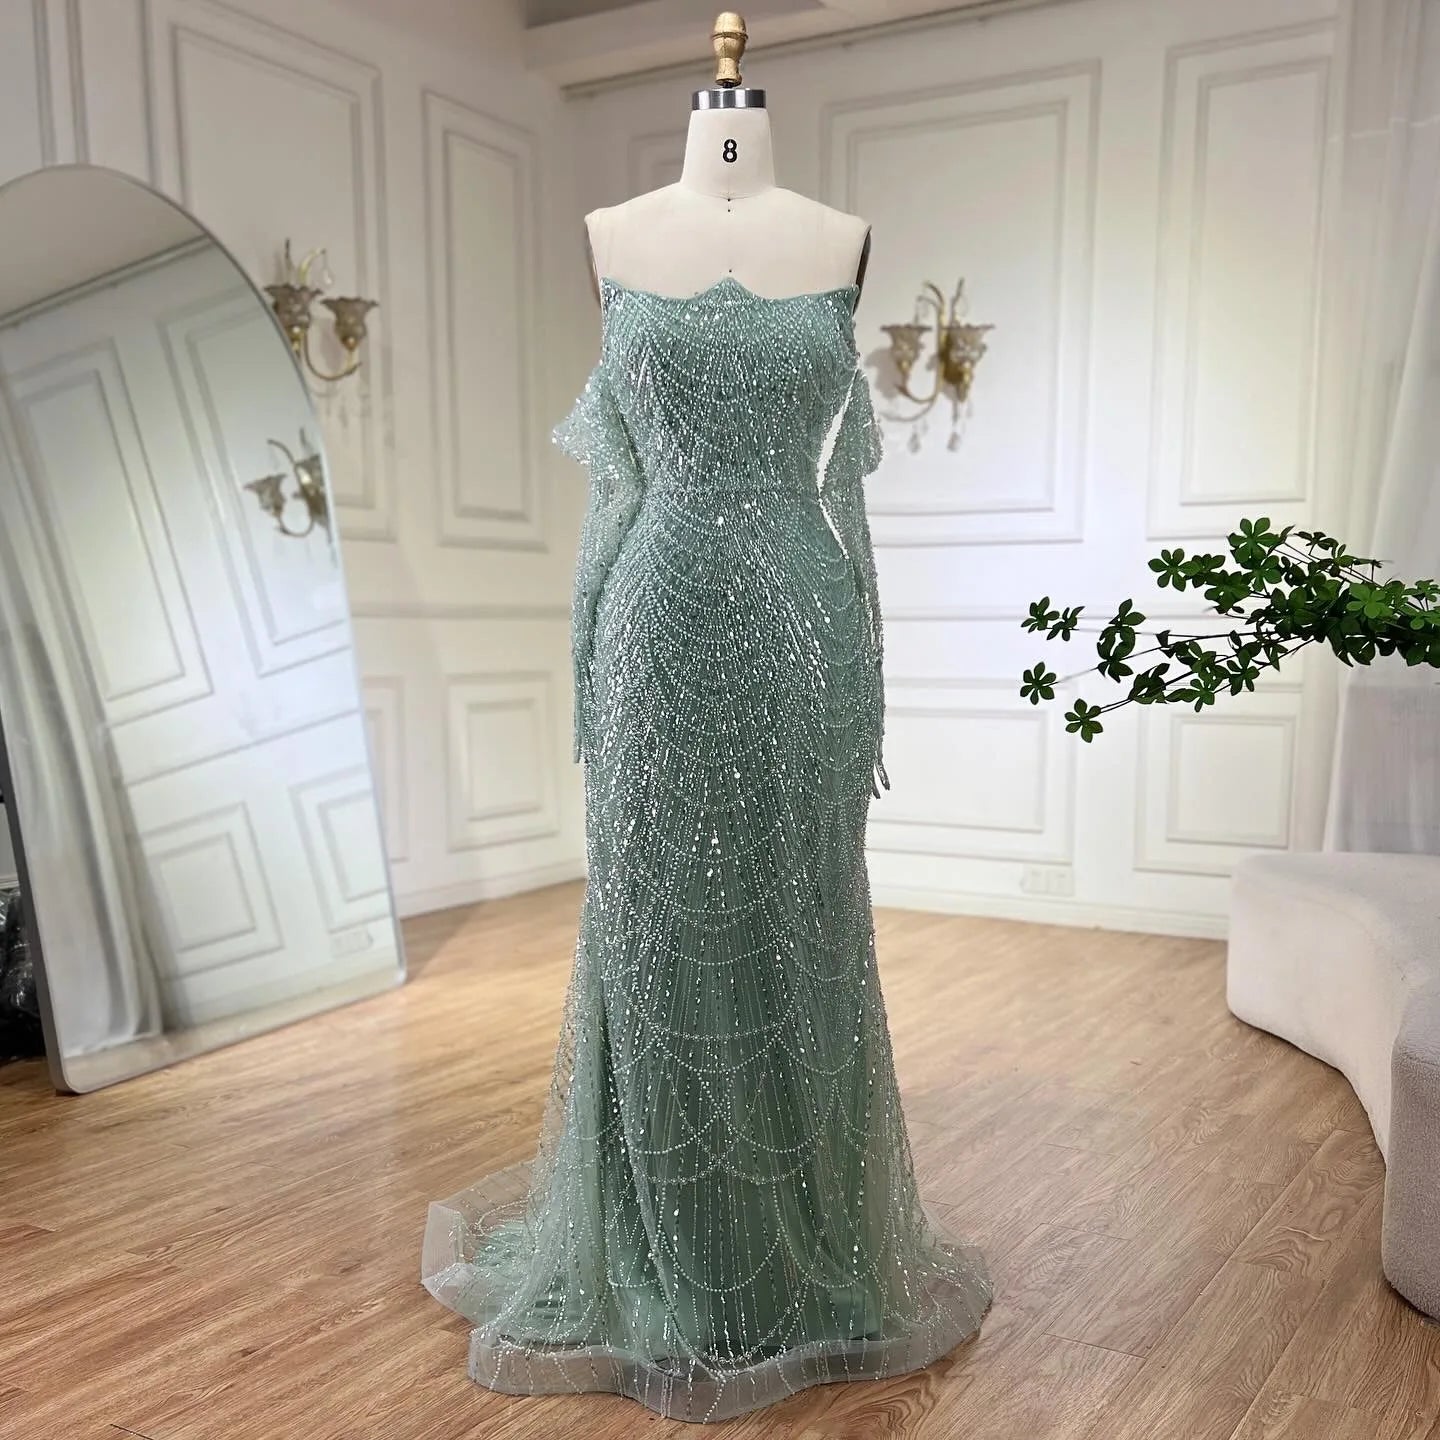 Luxury Olive Green Beaded Mermaid Evening Dress For Women Party Gown